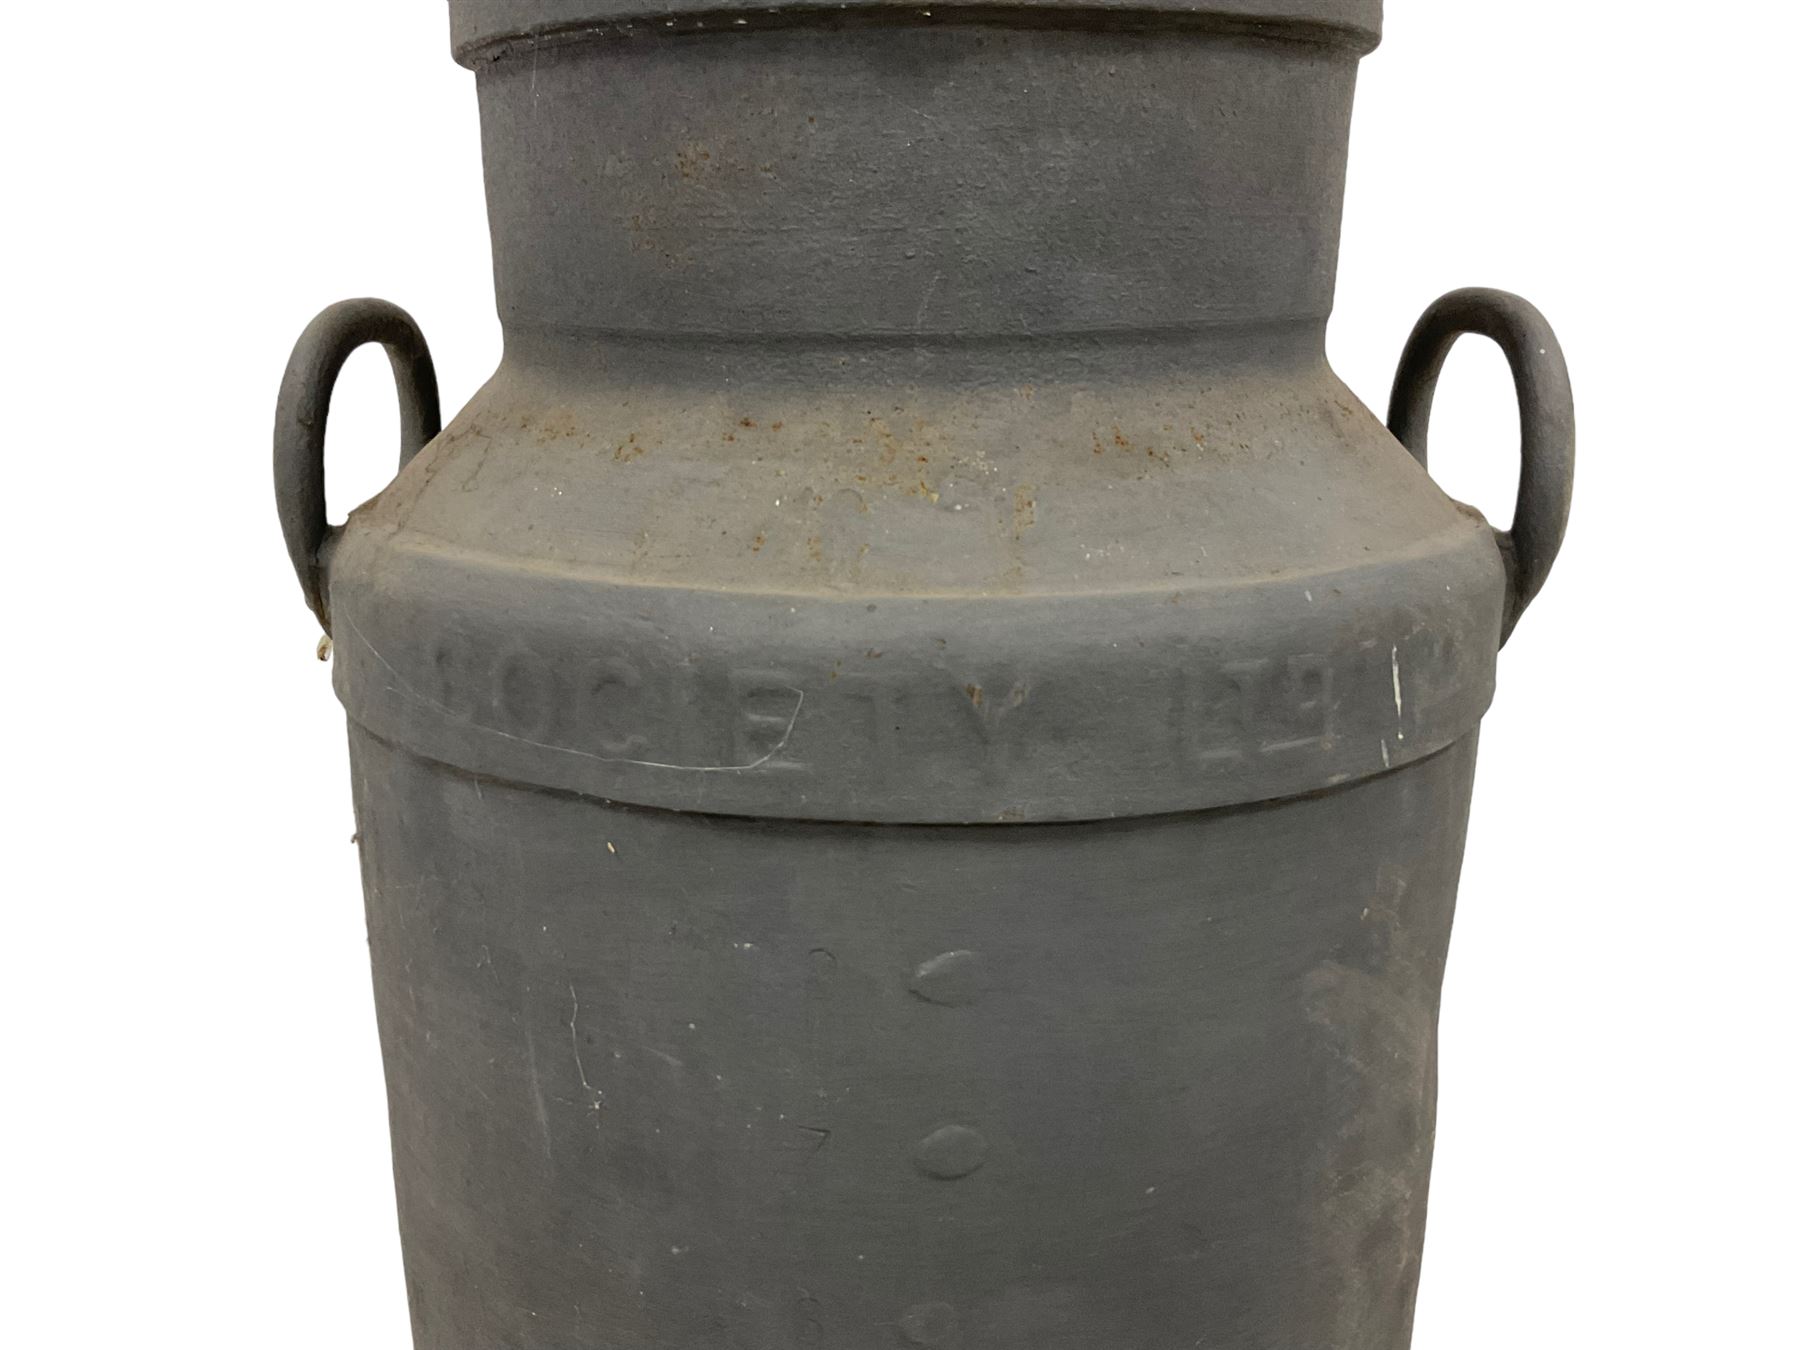 Co-op Wholesale Society Ltd - milk churn with lid and twin handles - Image 2 of 4